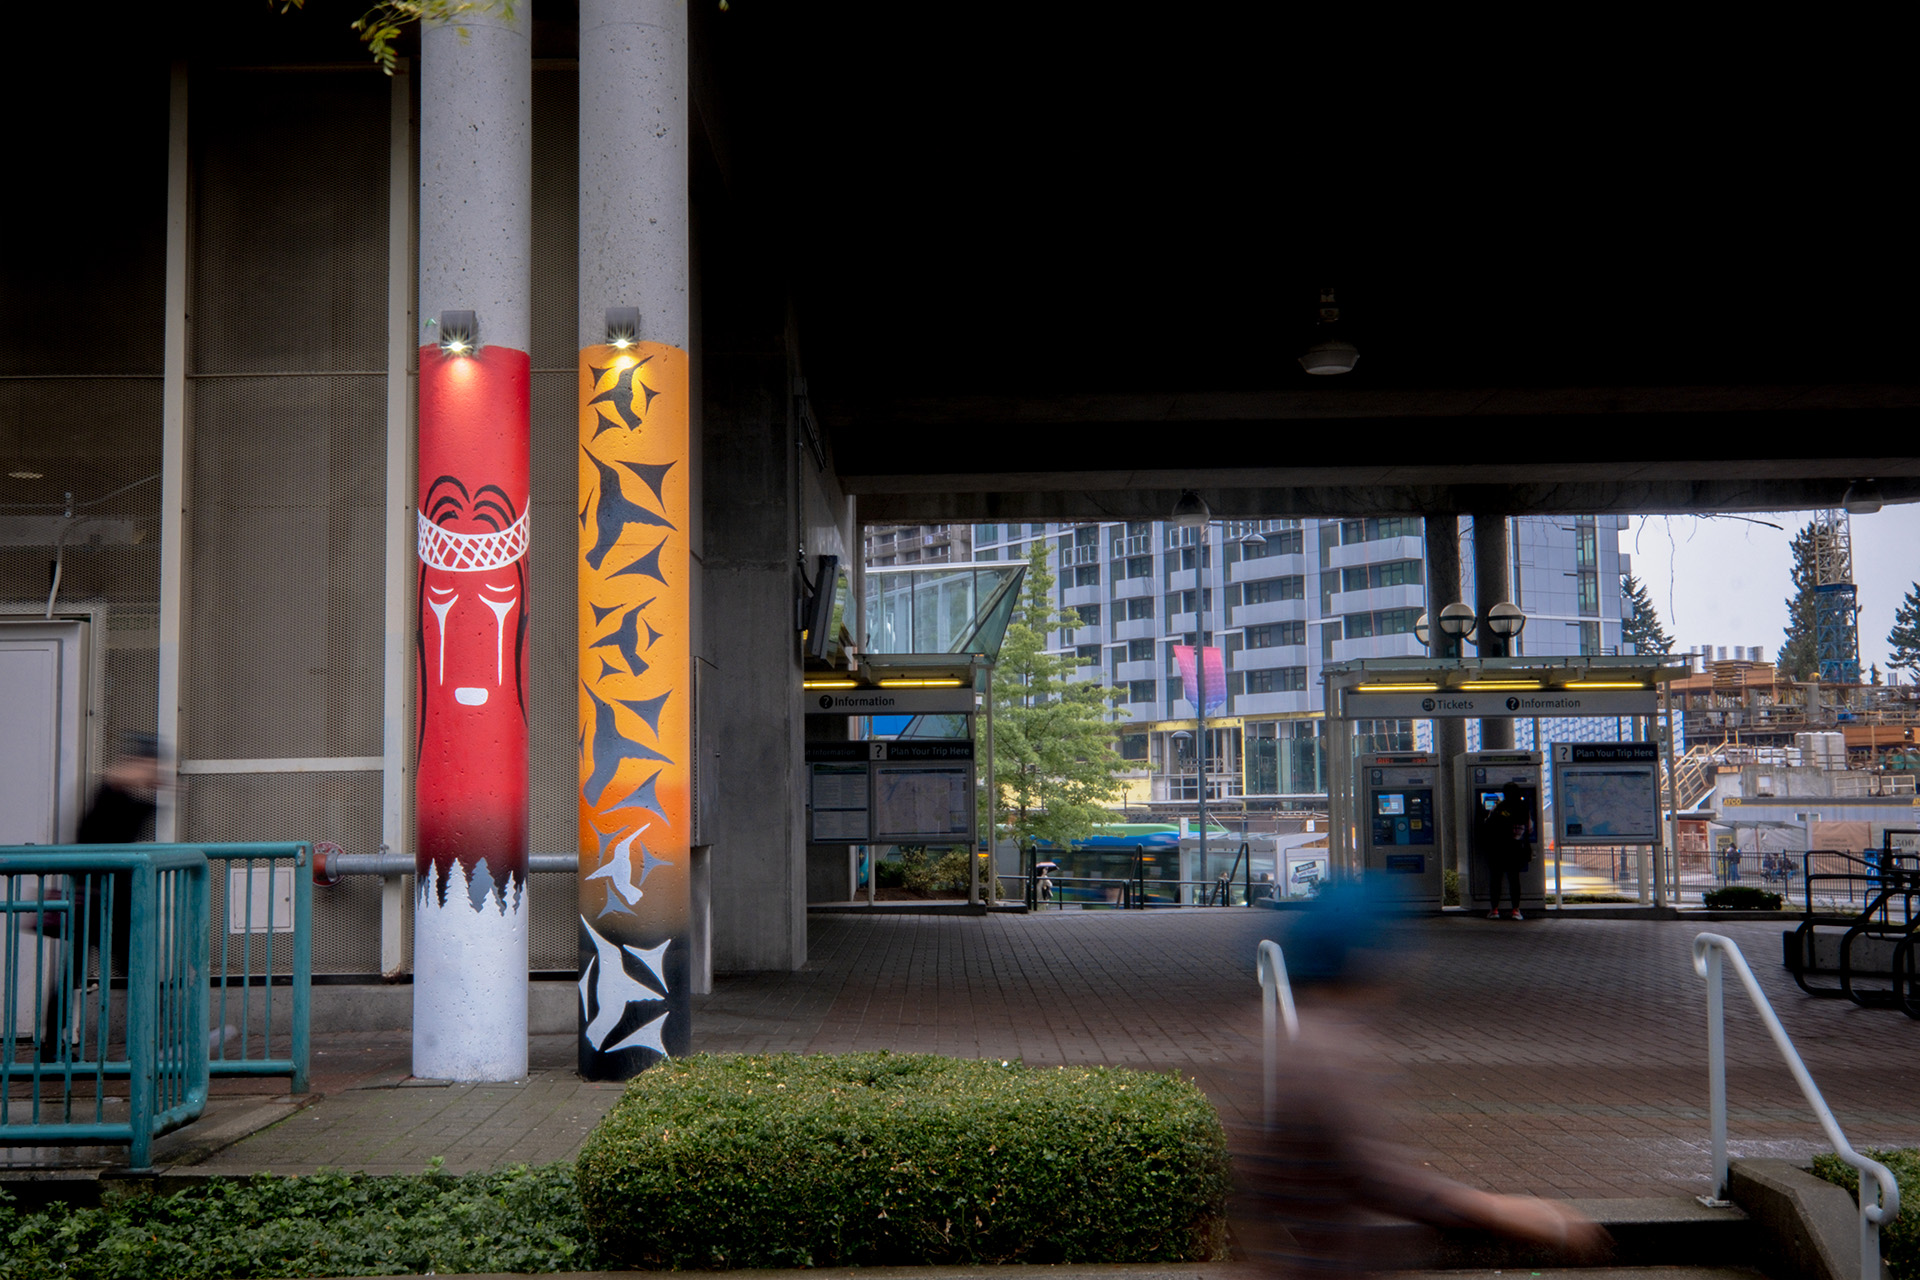  Artwork by Rain Pierre, on the columns at King George Station